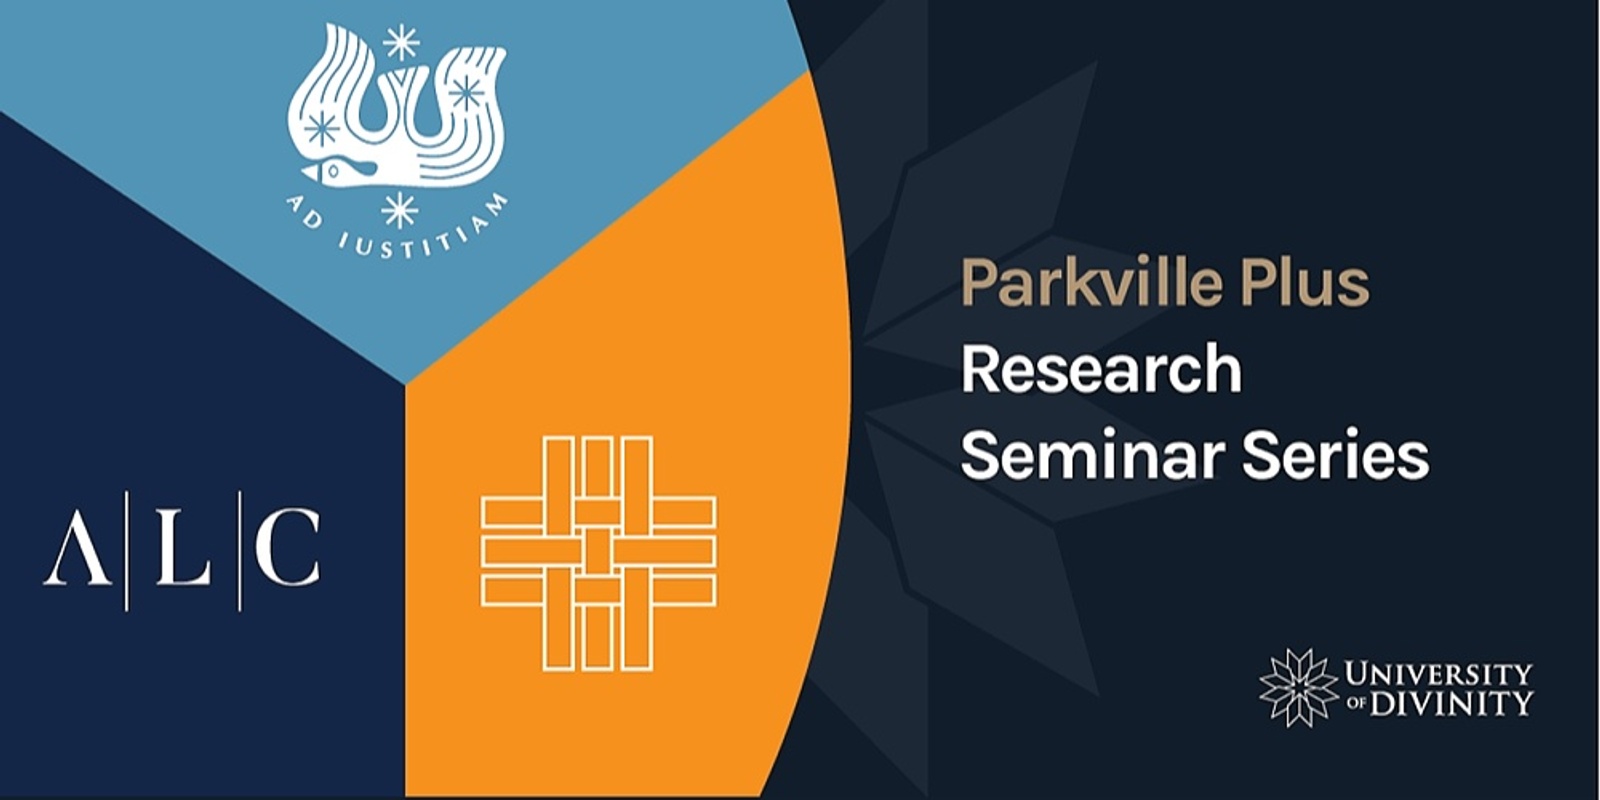 Banner image for Parkville Plus Seminar: "Plotting an Oceanic Voice" in person and online 10 October 2 pm- 5pm, Zoom link:  https://divinity.zoom.us/j/81317306408?pwd=ZnUxRHBDa3JBMWZUeFUyNjd3aHRuQT09  Meeting ID: 813 1730 6408 Passcode: 577261 